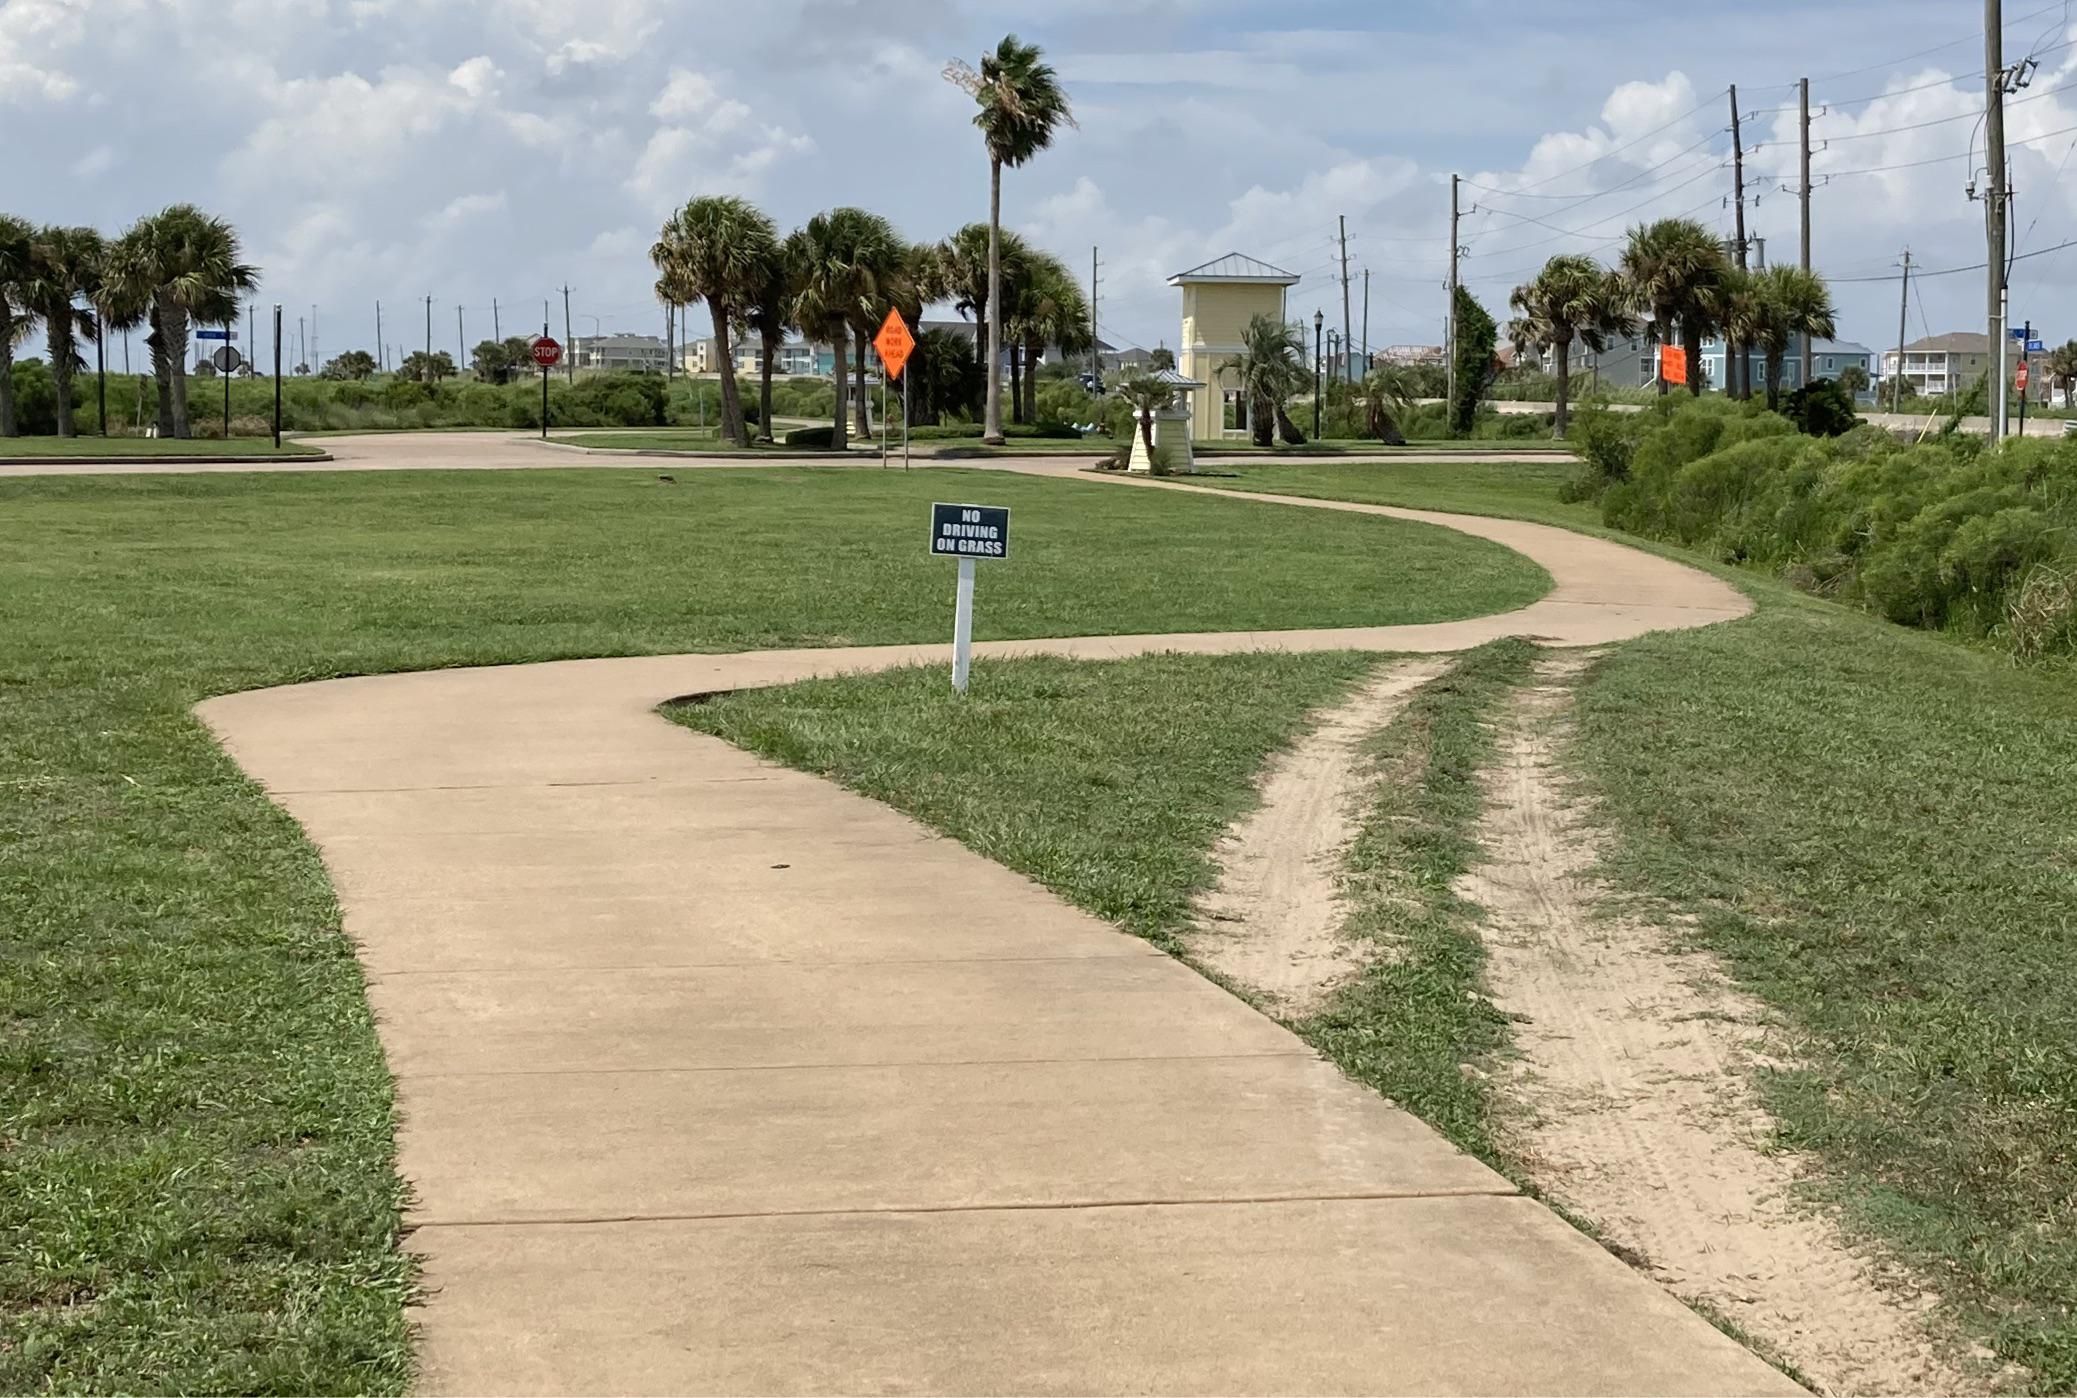 Spotted in real life while driving in a golf cart to the beach. They could have moved the sign 5 feet to the right and solved this problem.